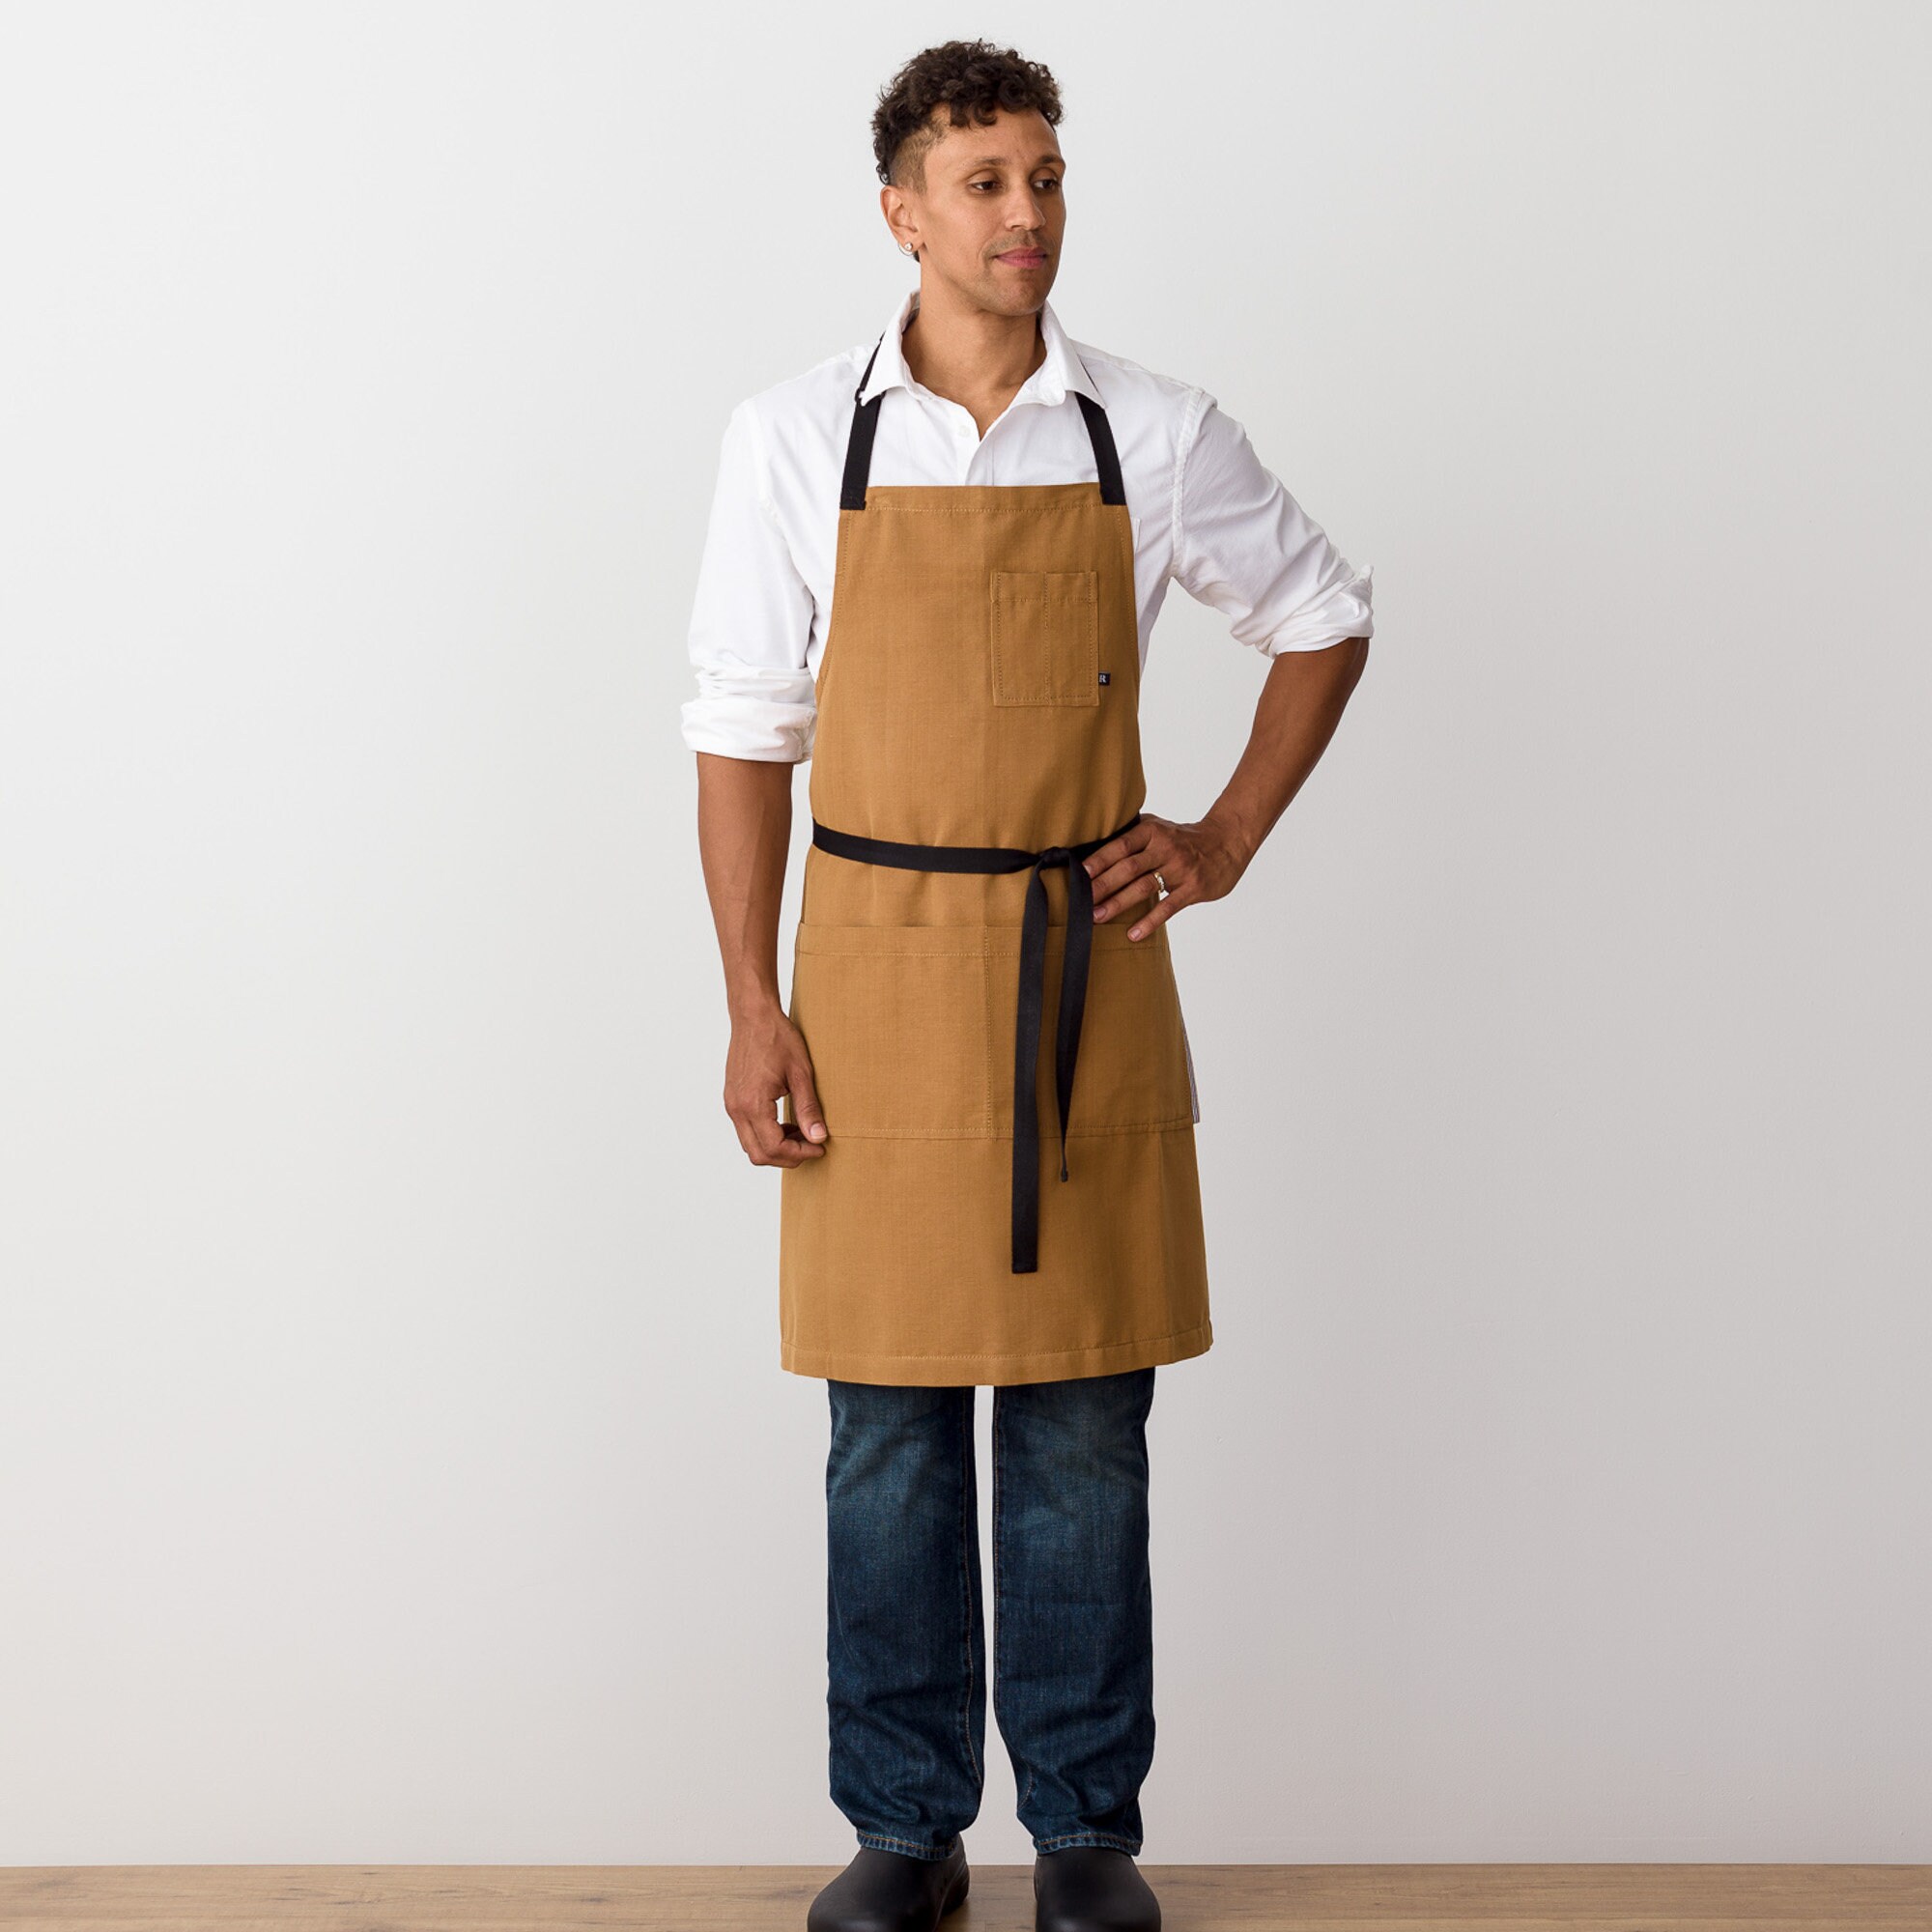 Hedley & Bennett Georgia Blue Crossback Apron - Professional Chef Apron with Pockets and Cross-Back Straps for Cooking & Grilling - Kitchen Aprons